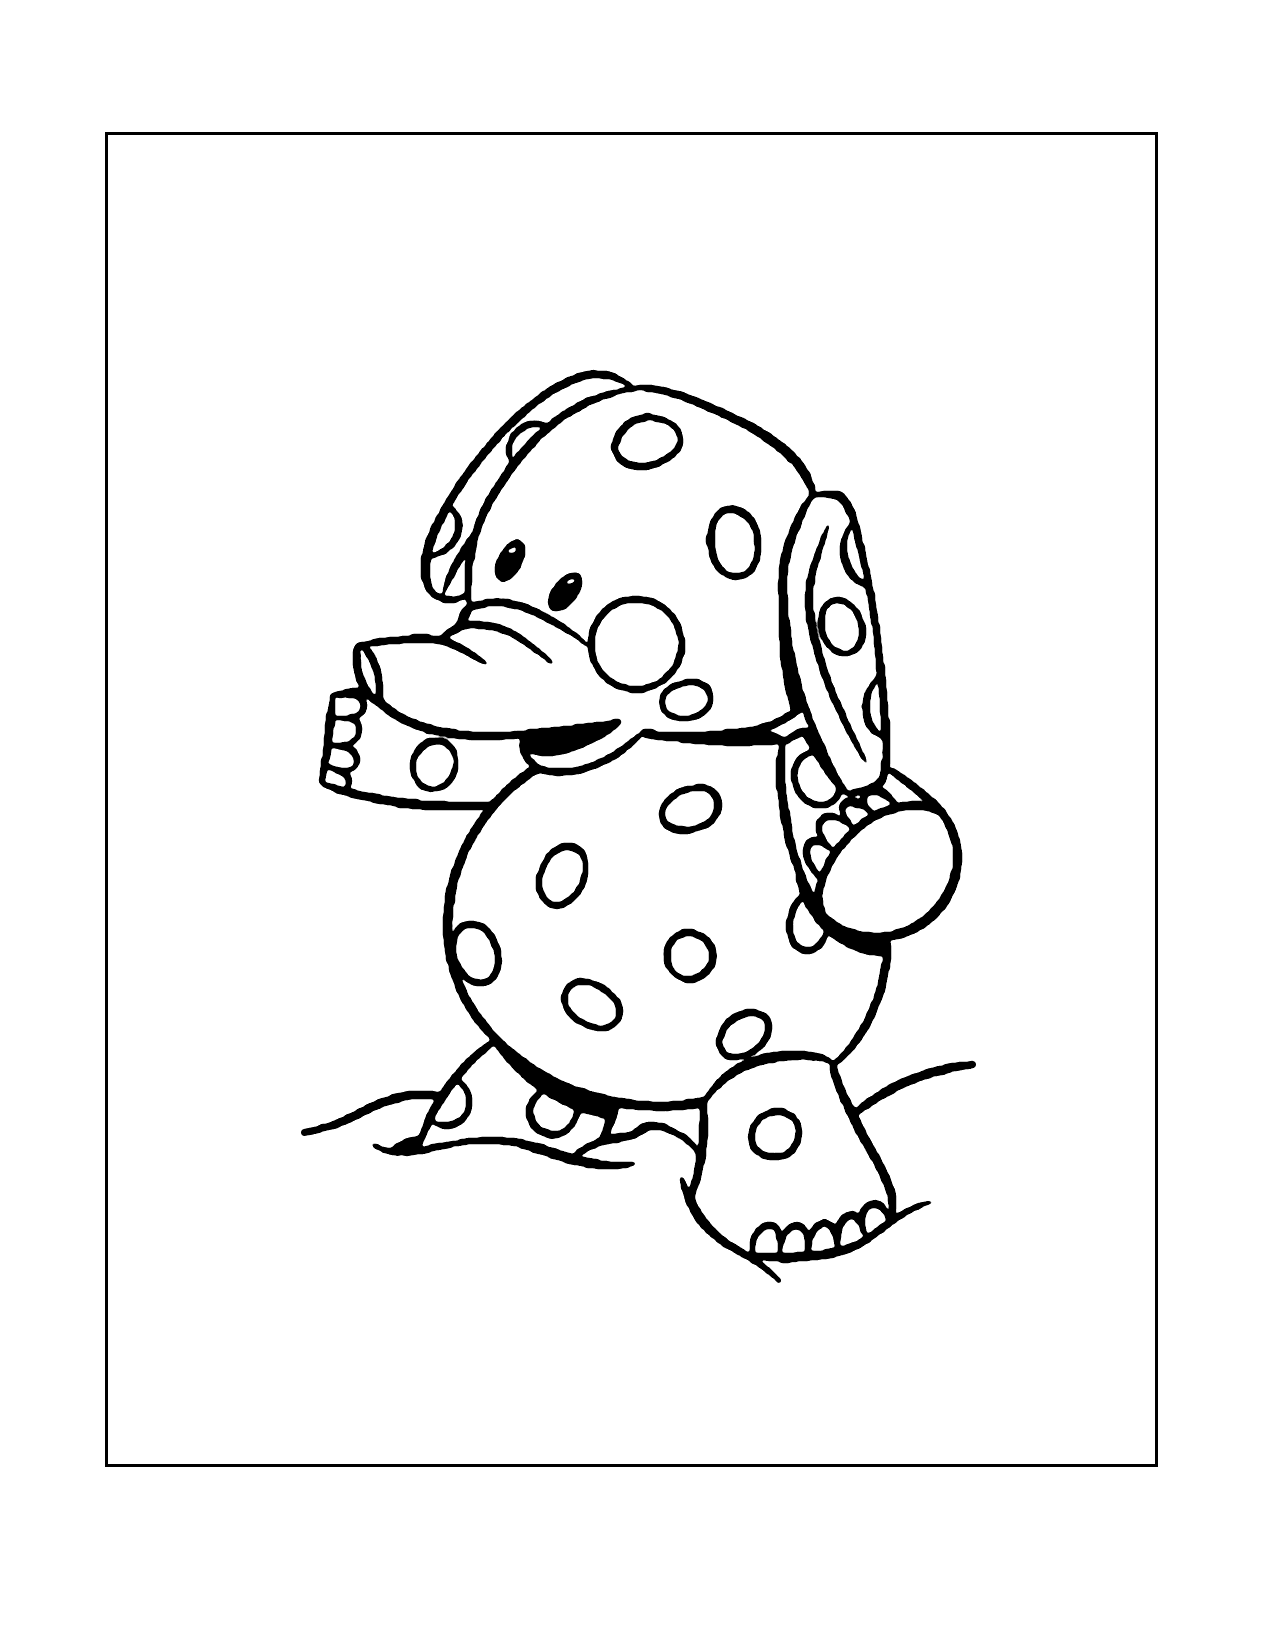 Polka Dot Elephant Toy Coloring Page